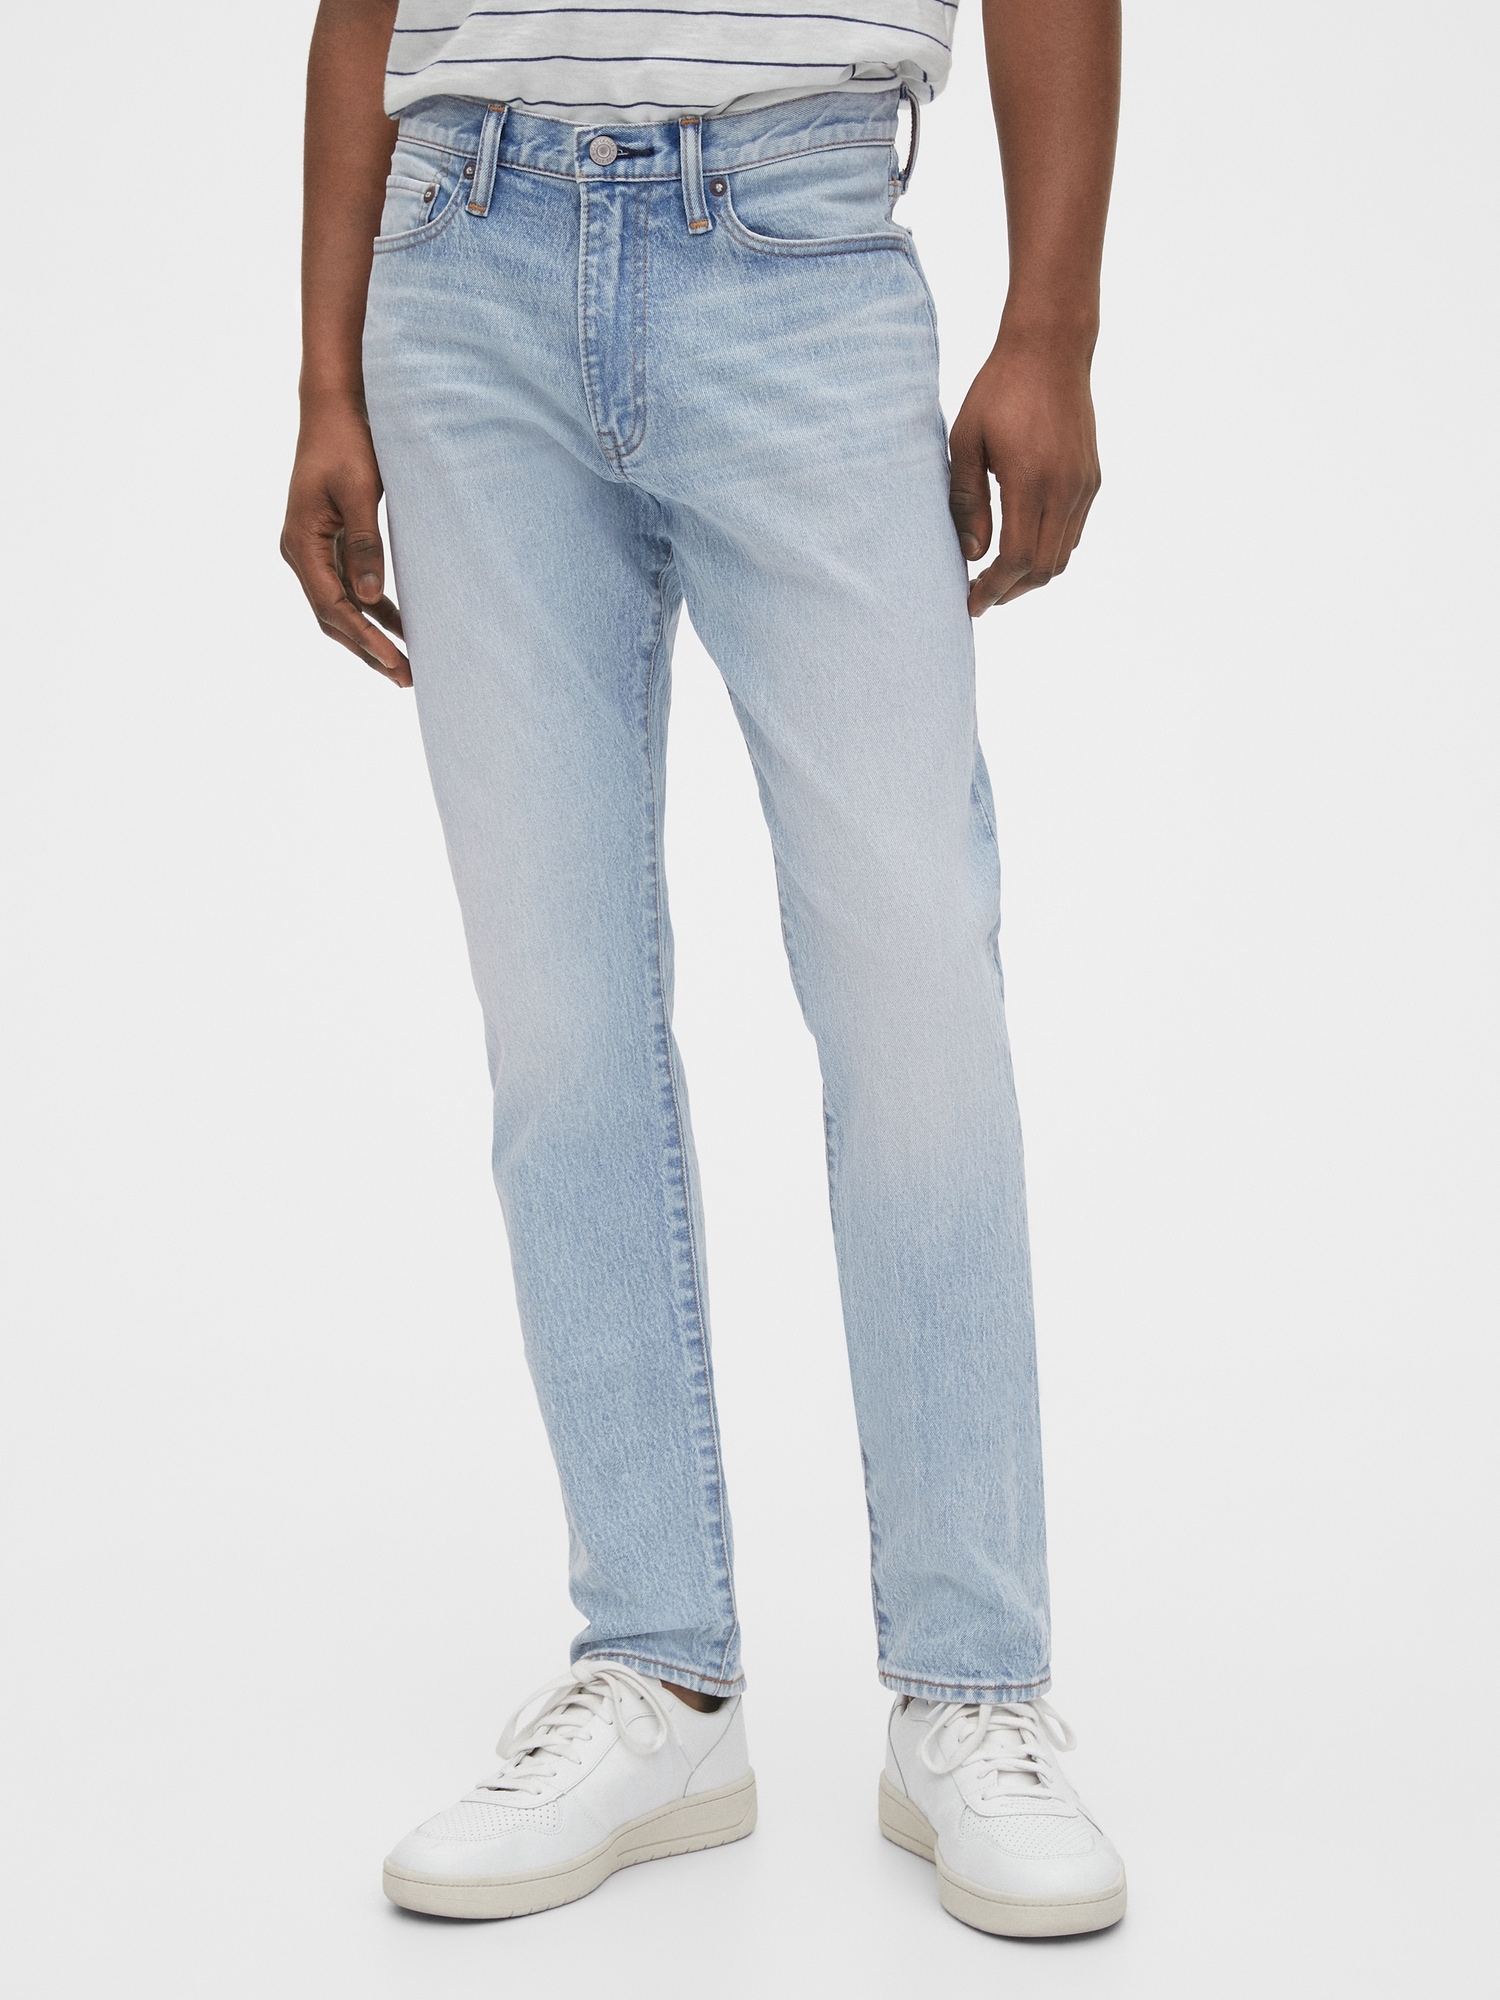 what is a tapered jeans